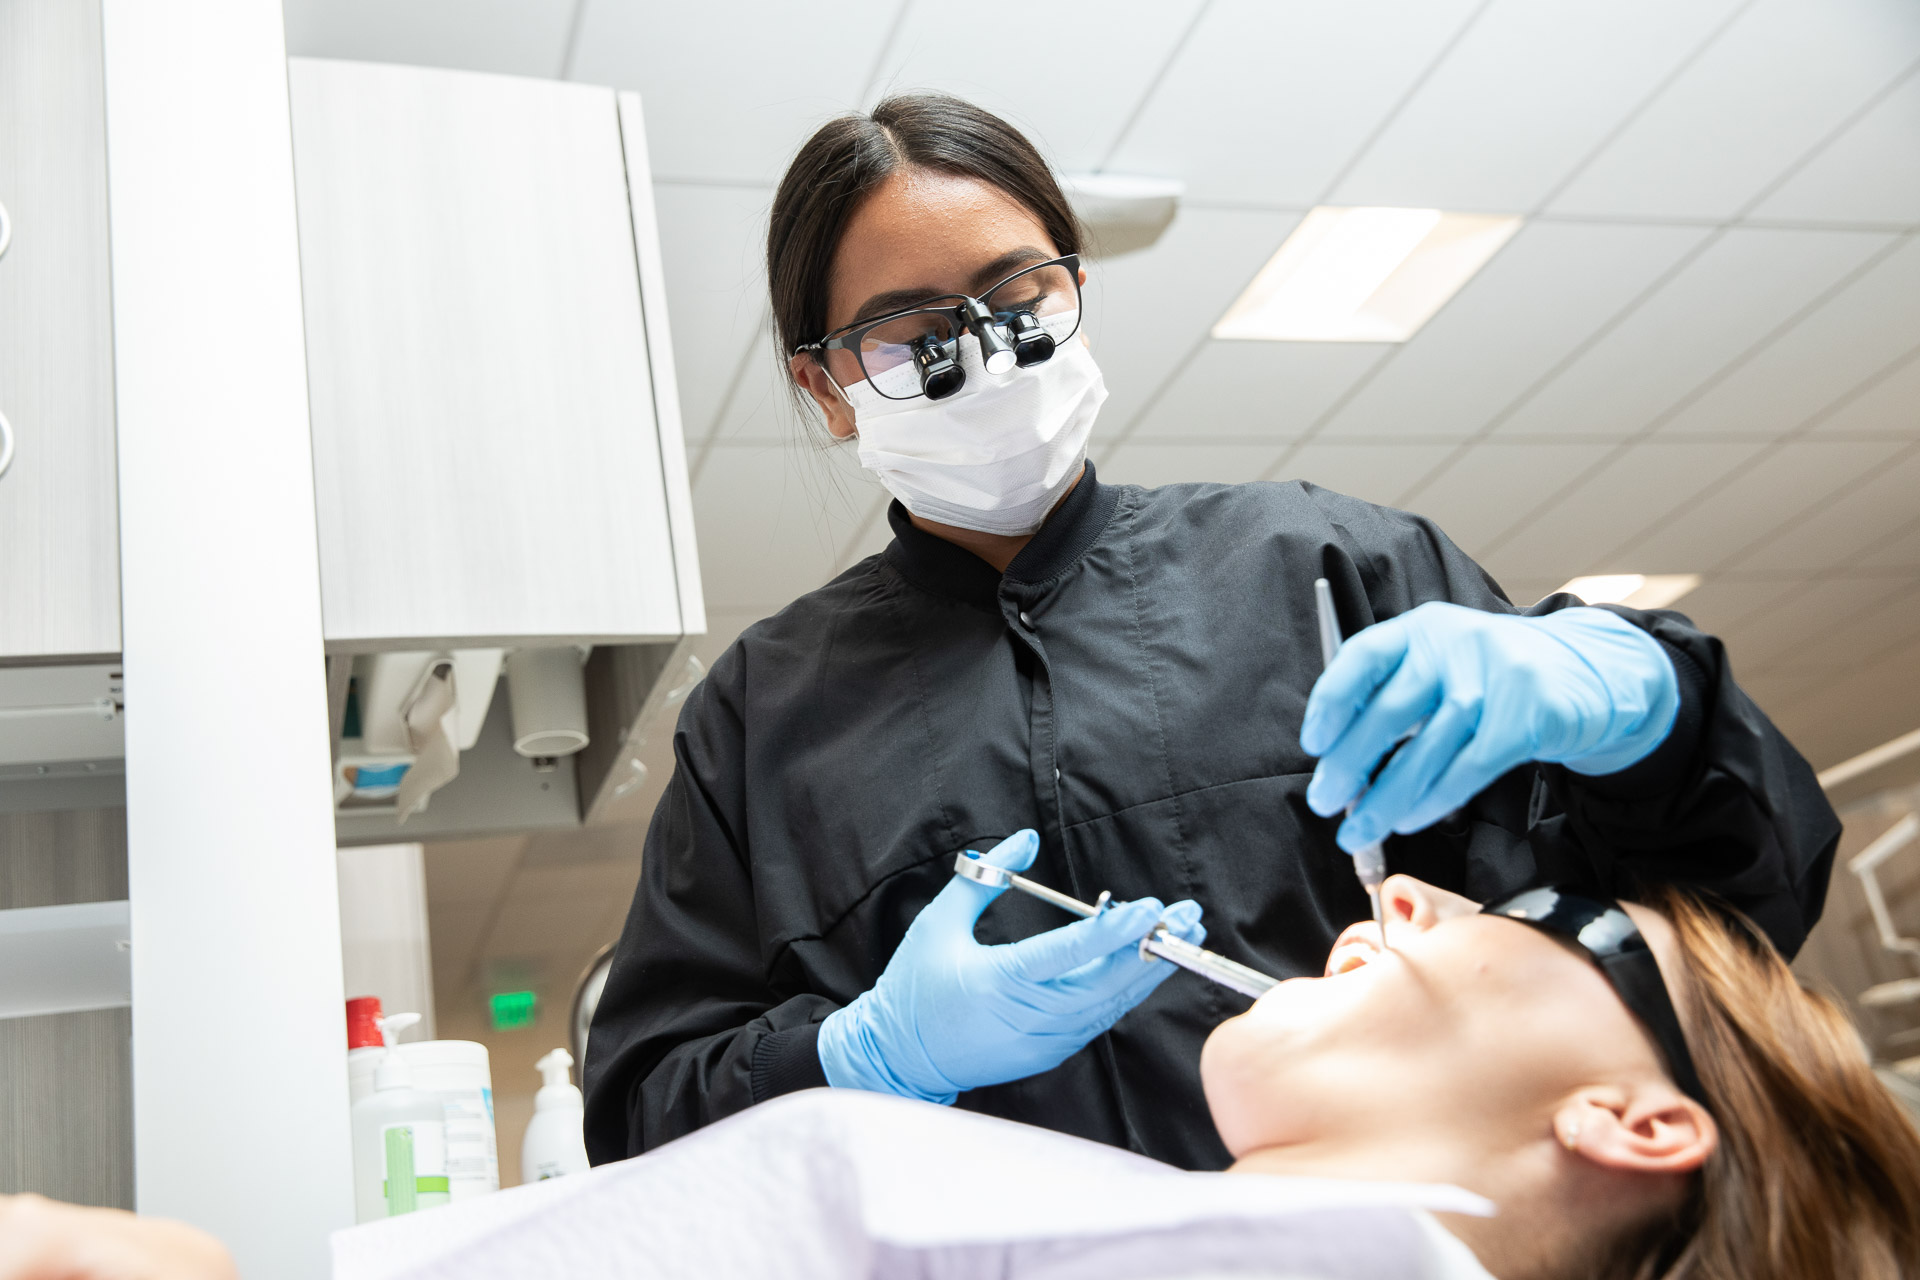 dental hygiene student in PPE assisting a patient